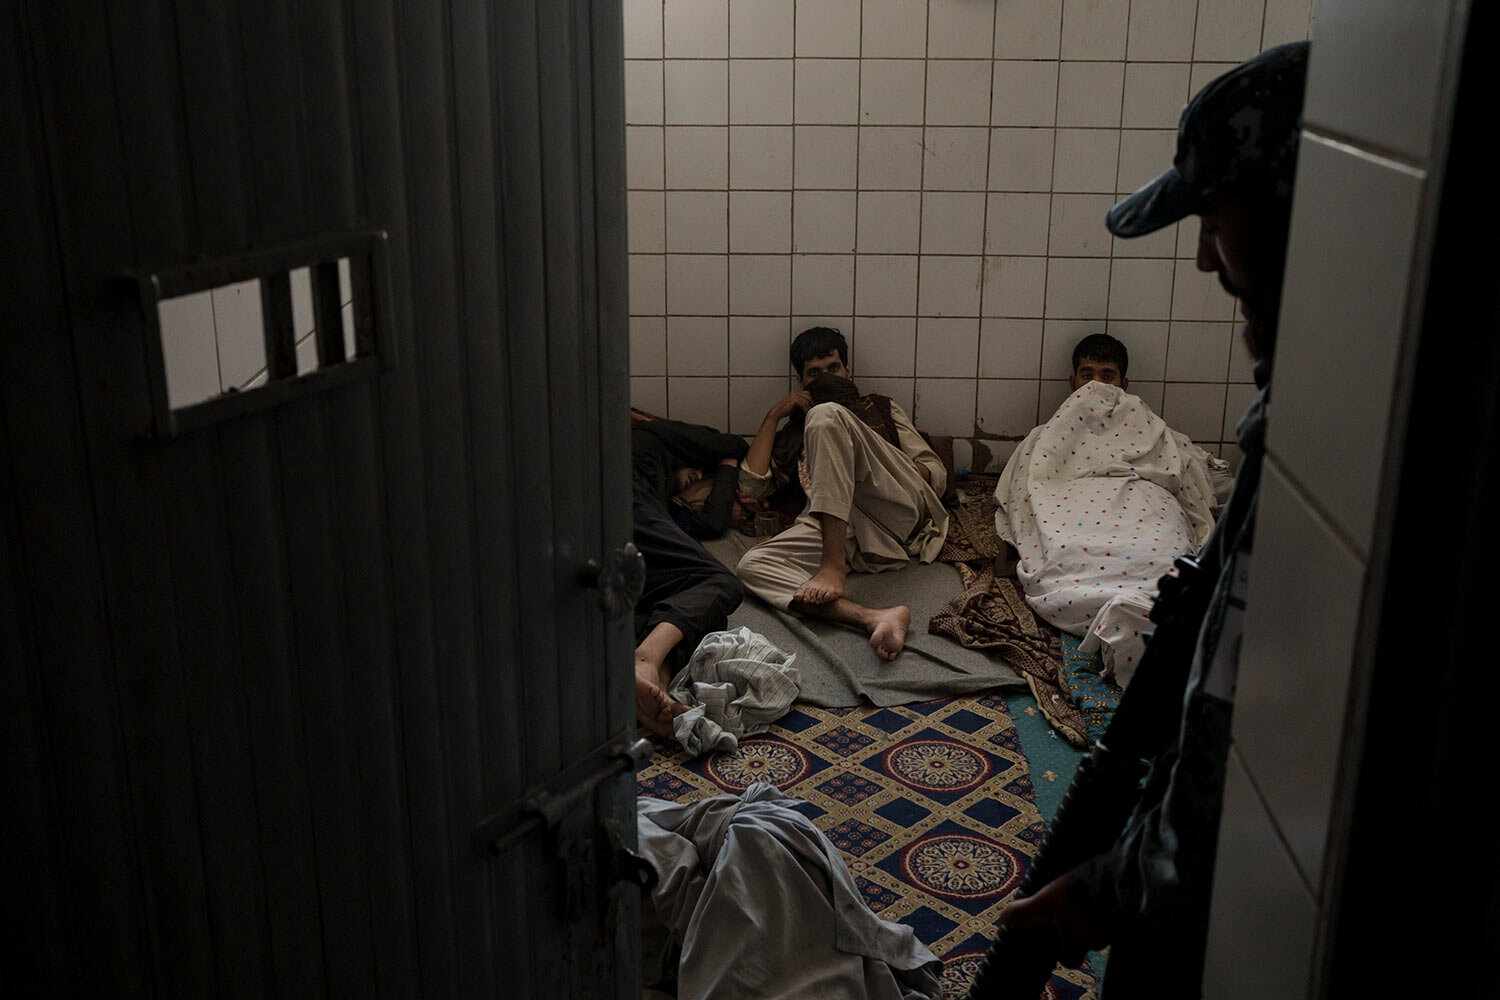  A Taliban fighter talks to detainees  at a police station in Kabul, Afghanistan, Sunday, Sept. 19, 2021. (AP Photo/Felipe Dana)  